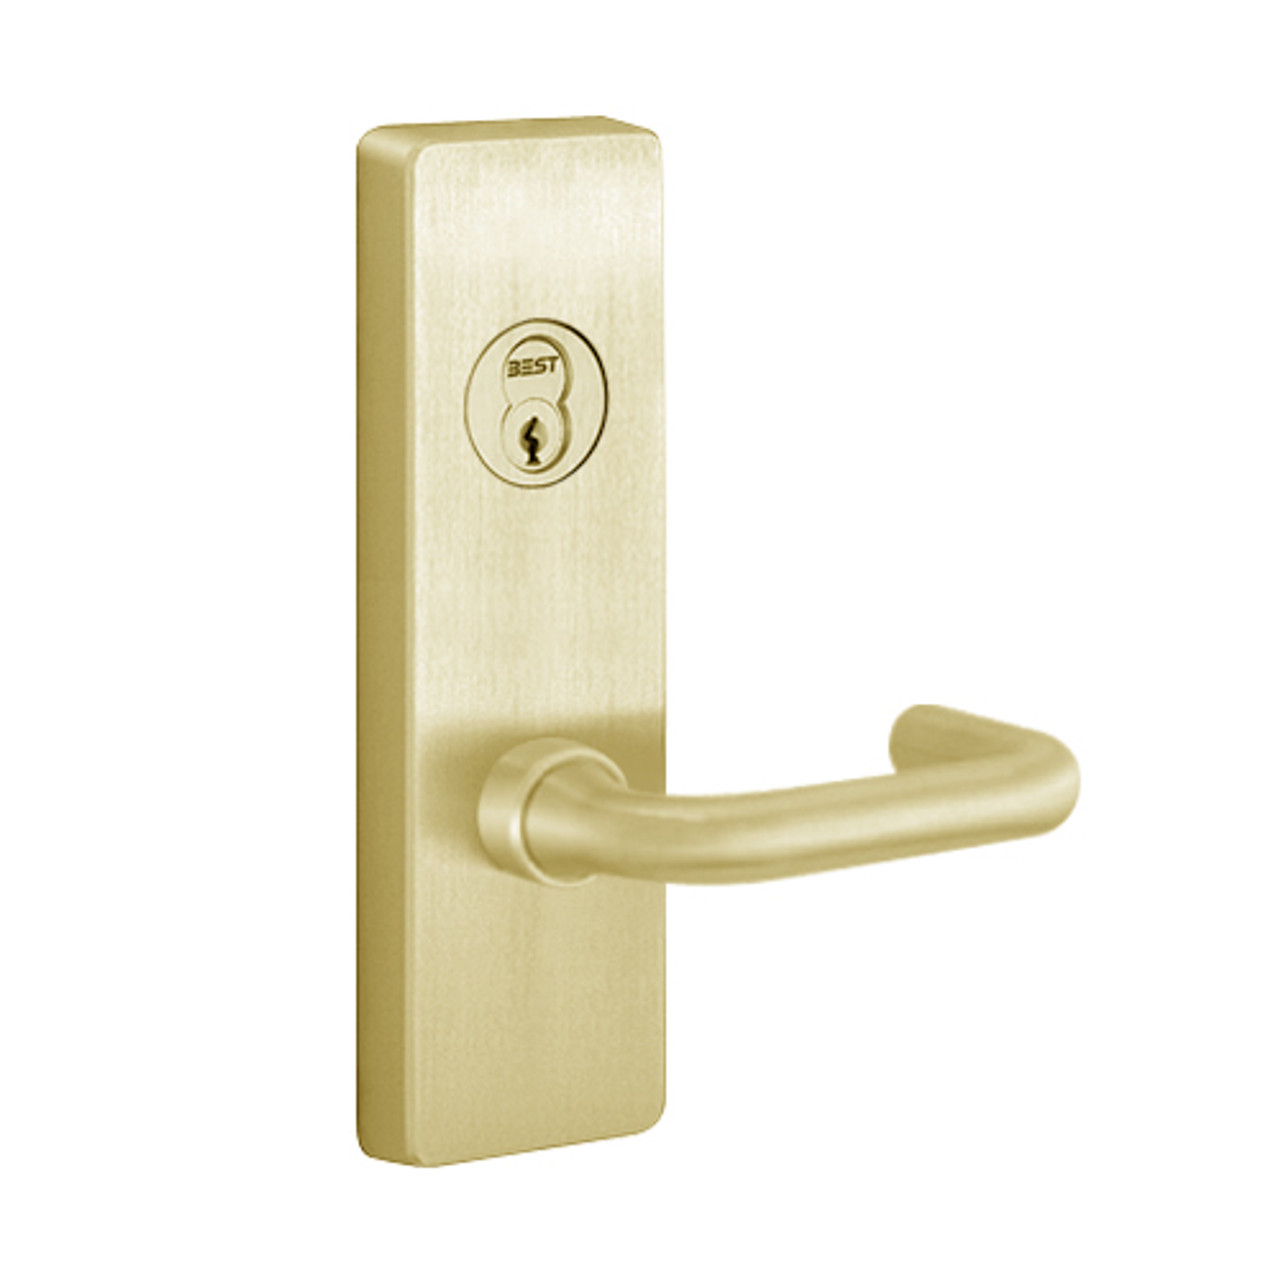 M4903C-605-RHR PHI Key Retracts Latchbolt Trim with C Lever Design for Apex and Olympian Series Exit Device in Bright Brass